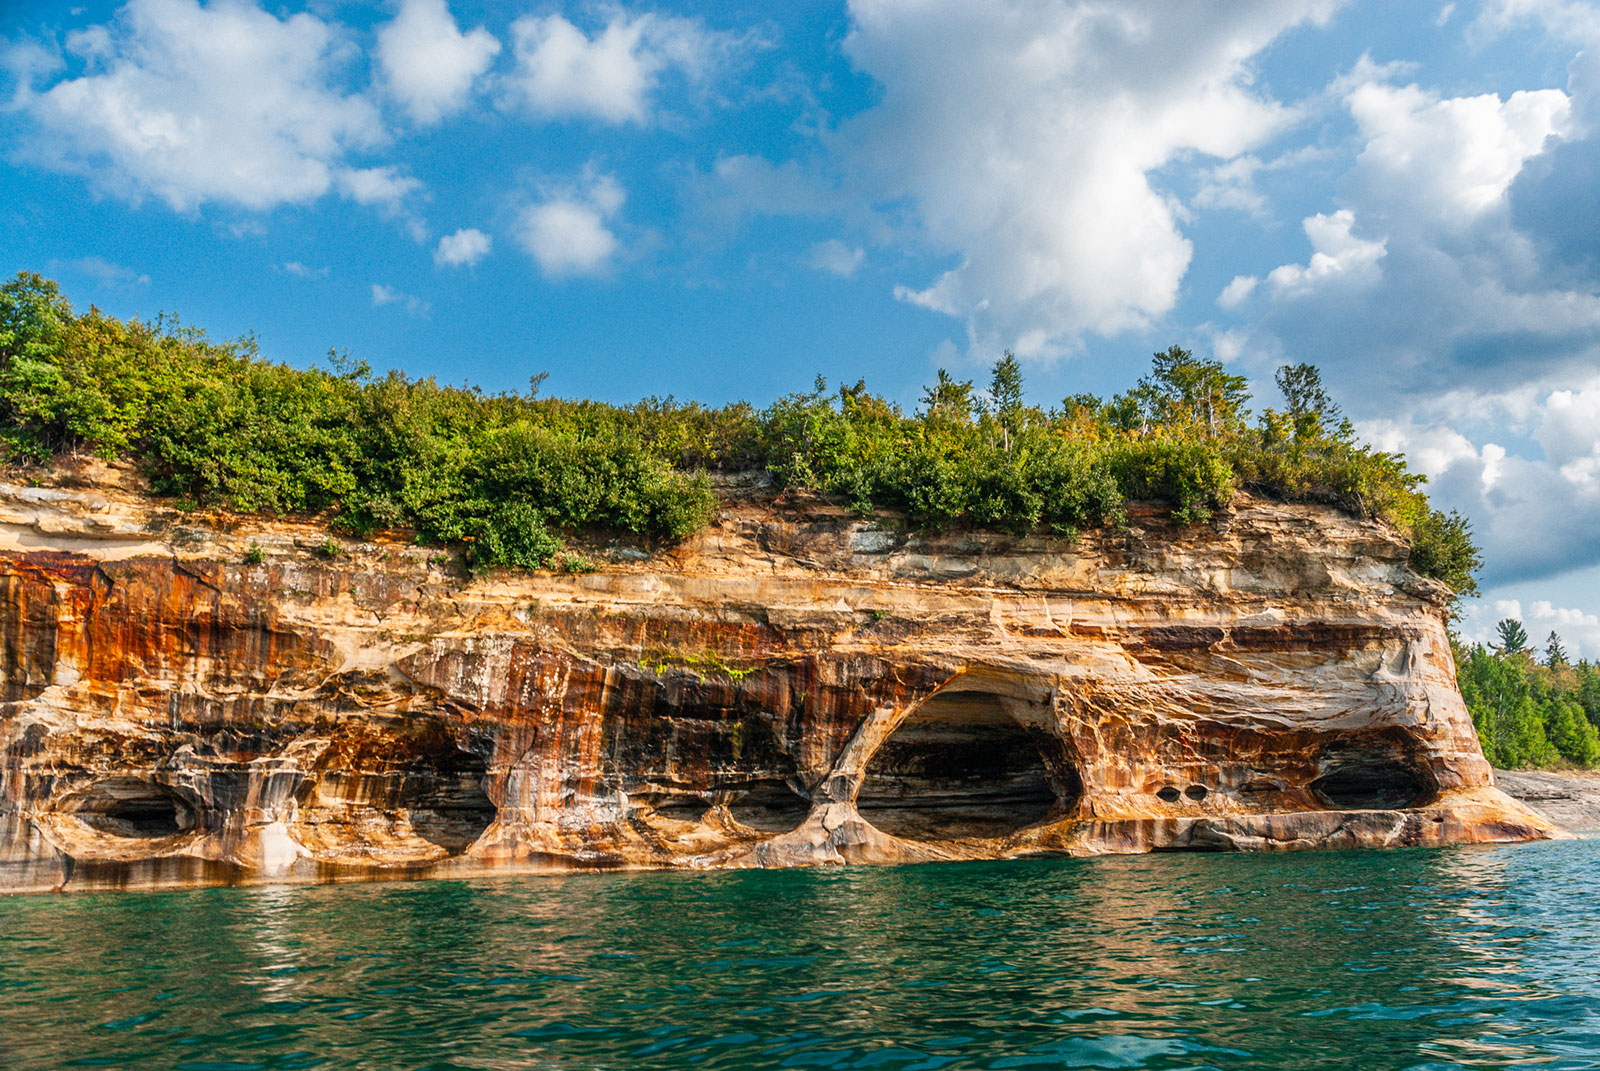 Preparing for Your Trip to Munising and Pictured Rocks